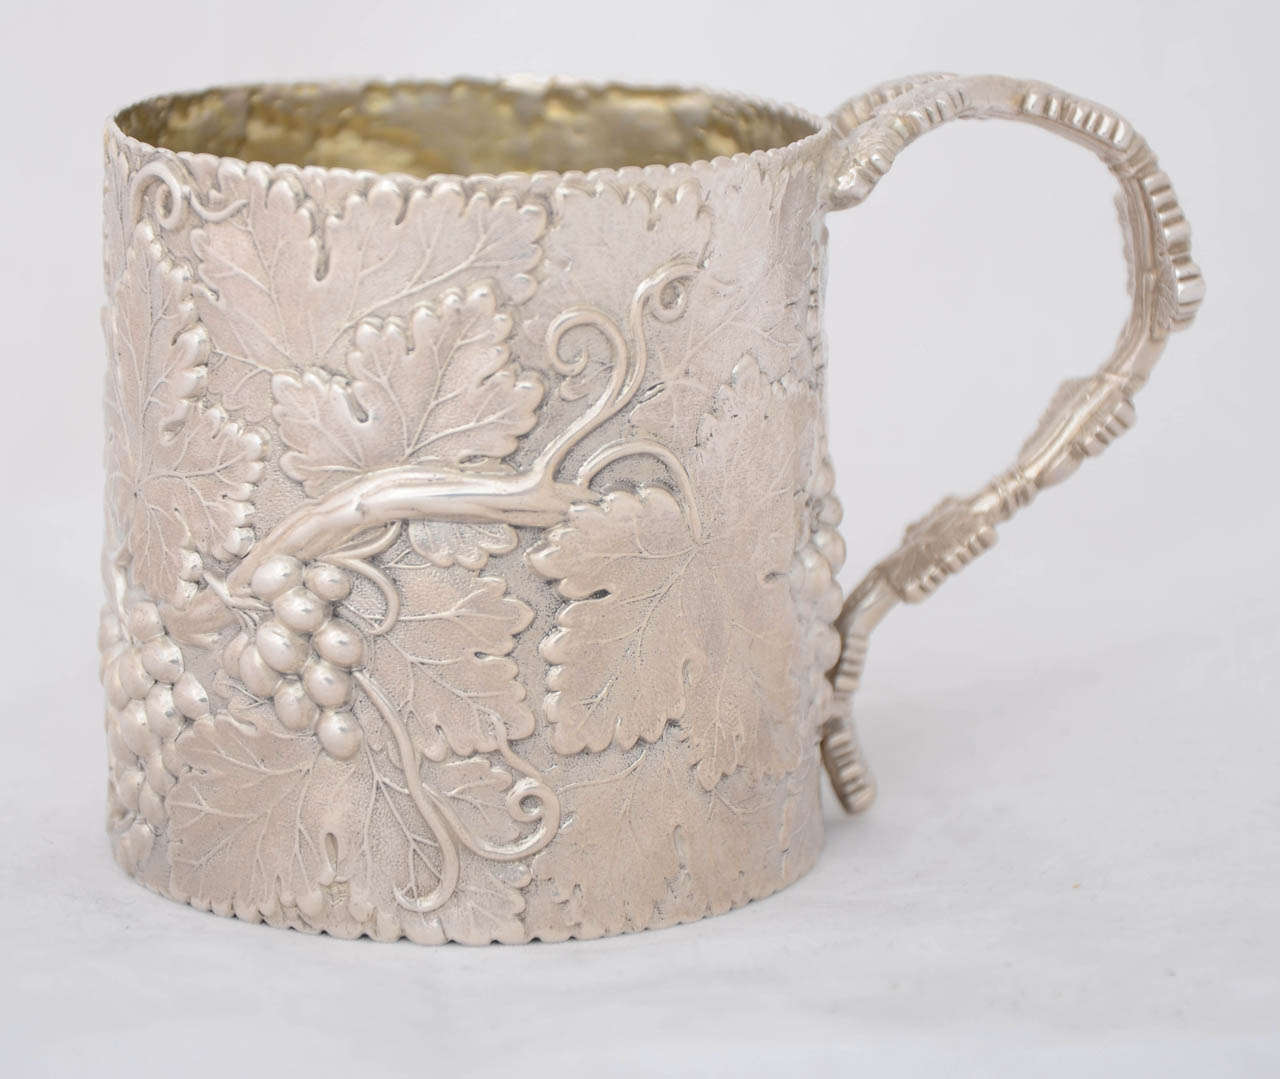 A beautiful English antique sterling silver William IV Mug, hallmarked Birmingham 1833 and made by Joseph Wilmore. This mug is heavier than is usual for this design at 212gms. It is 7.8cms high and is a lovely example of vine design.